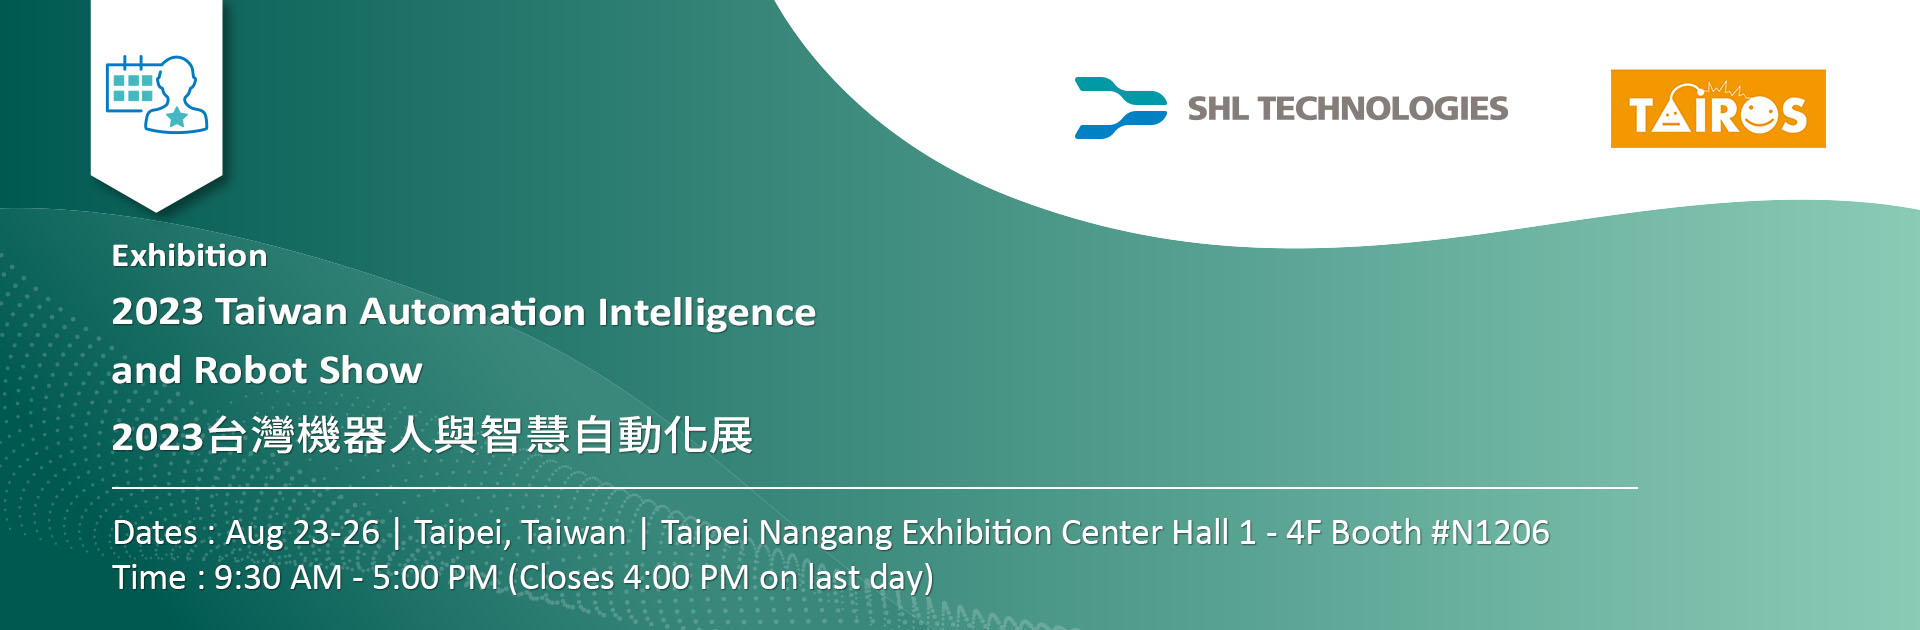 Banner of SHL Technologies announcing its participation for the first time at 2023 Taiwan Automation Intelligence and Robotic Show. It will exhibit at Booth #N1206 from Aug 23-26.